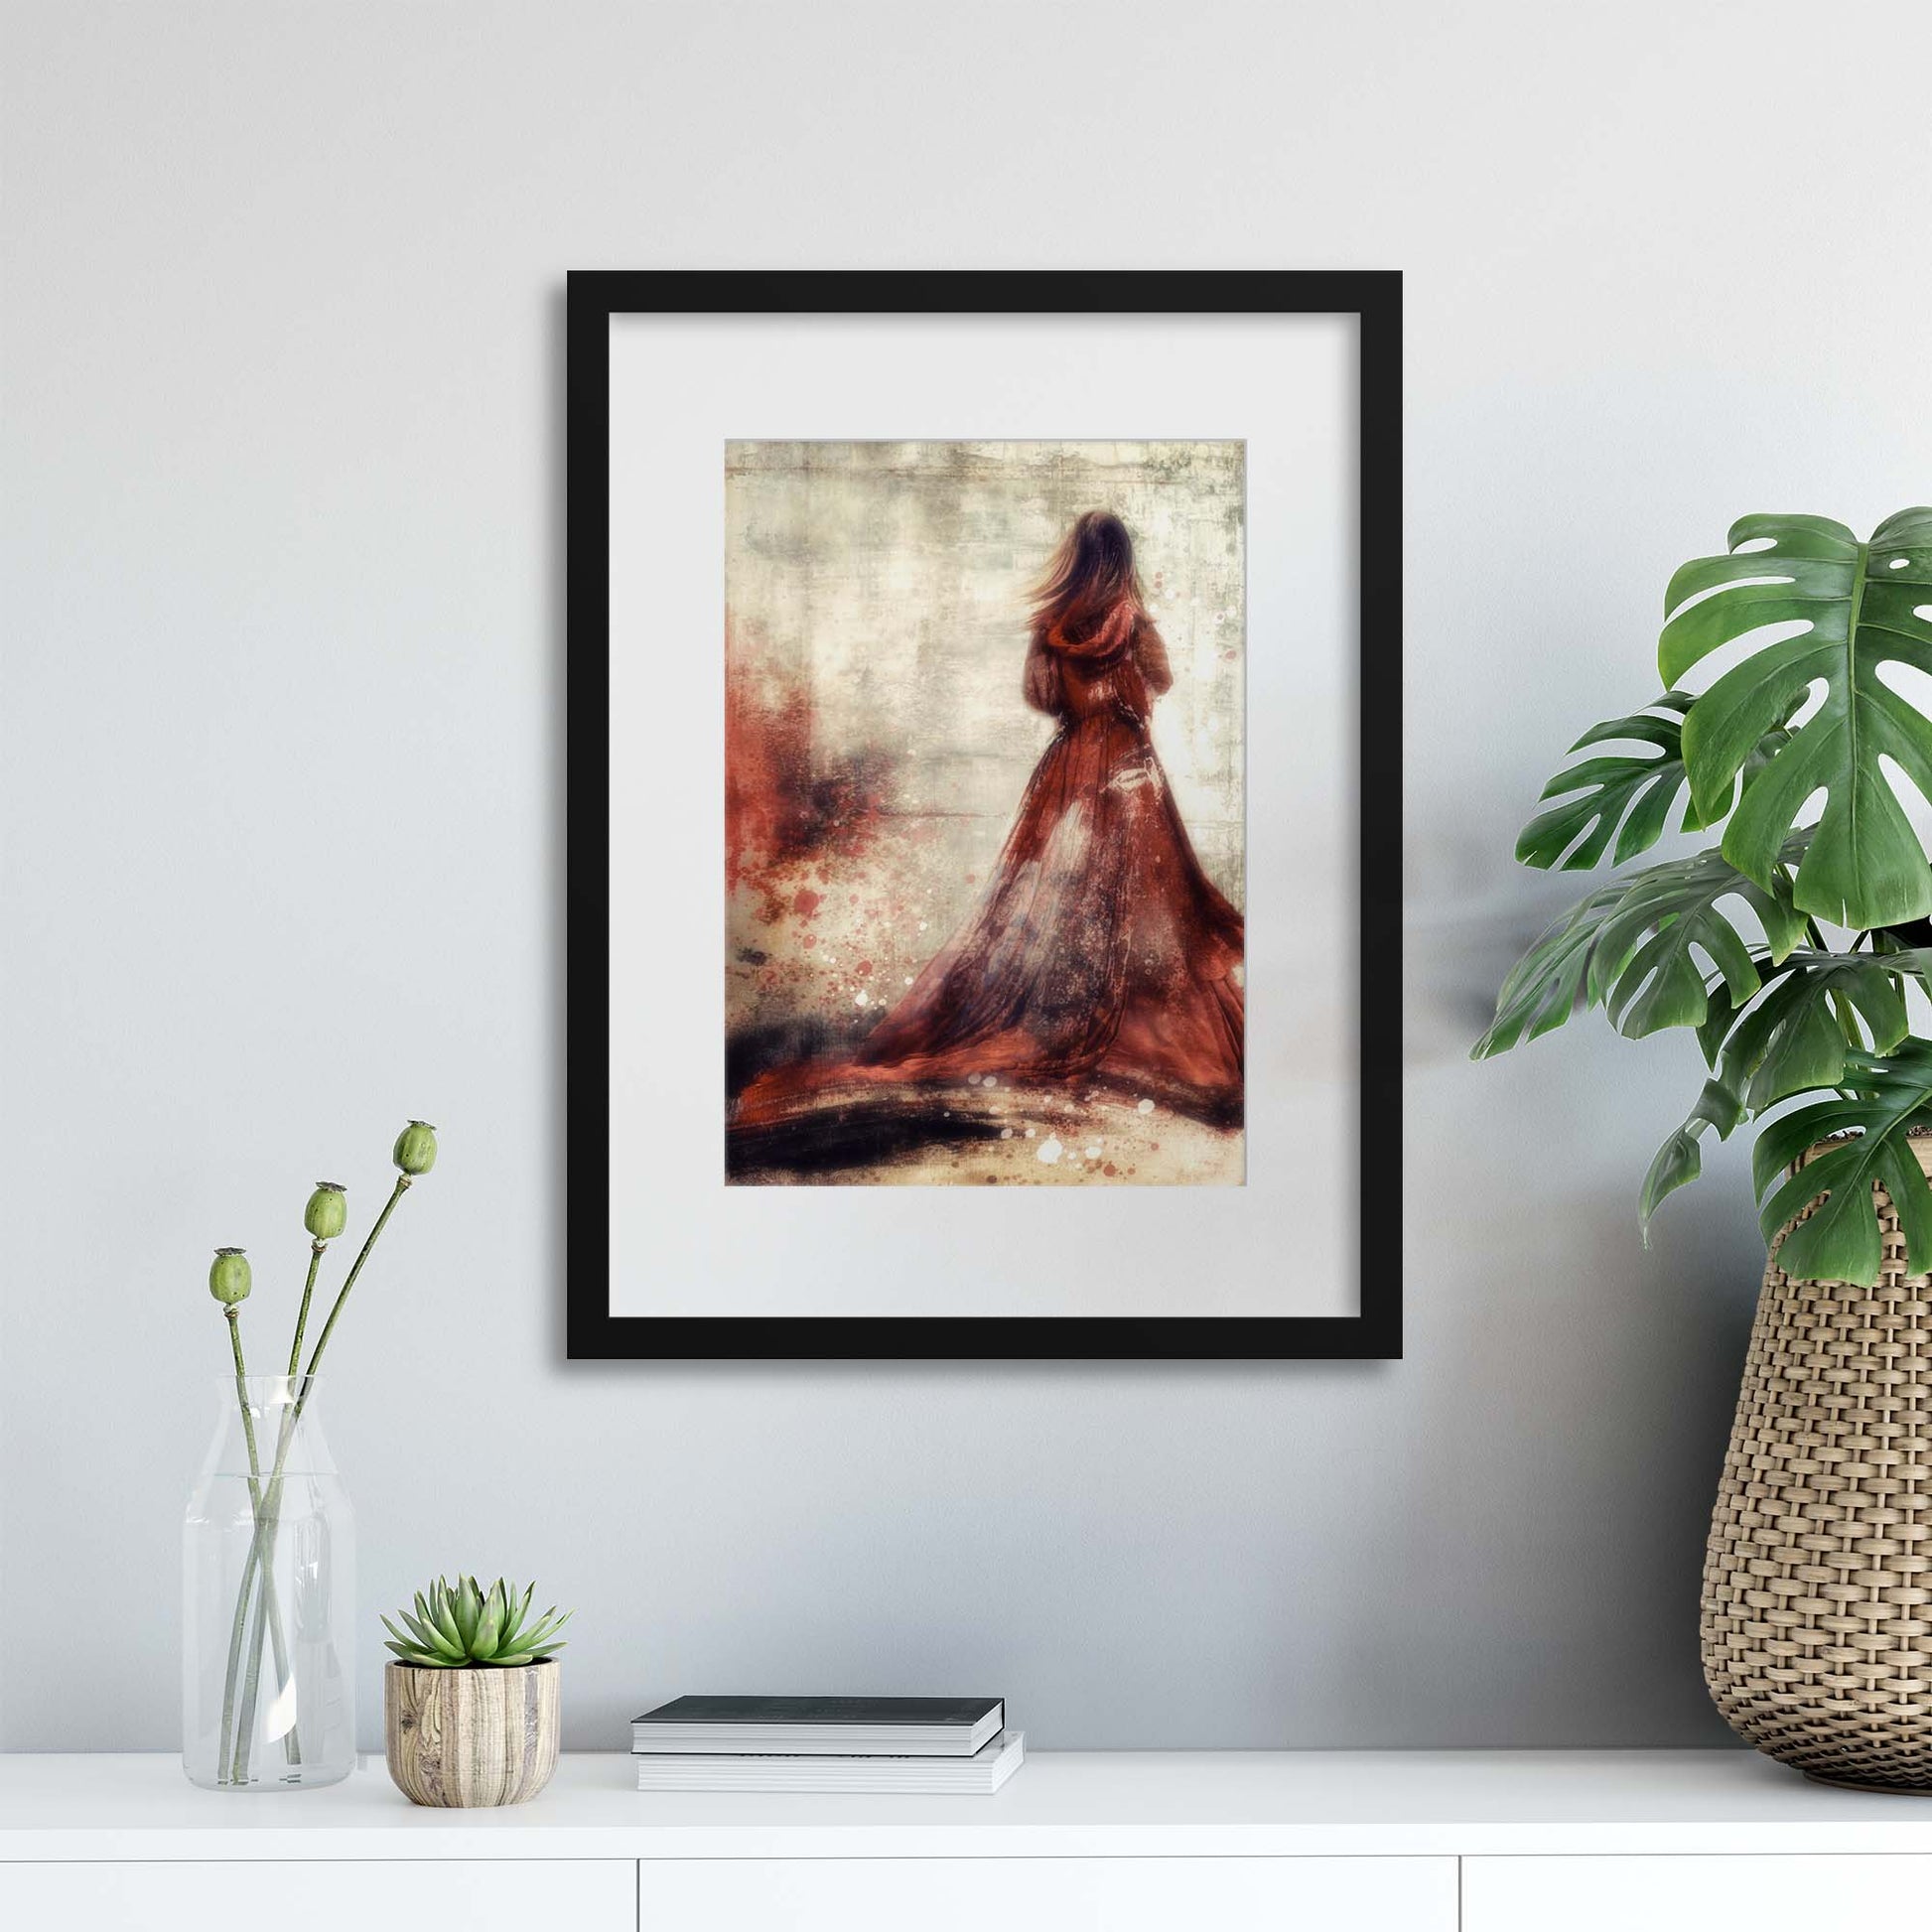 She'll Wear the Red Dress by Charlaine Gerber Framed Print - USTAD HOME